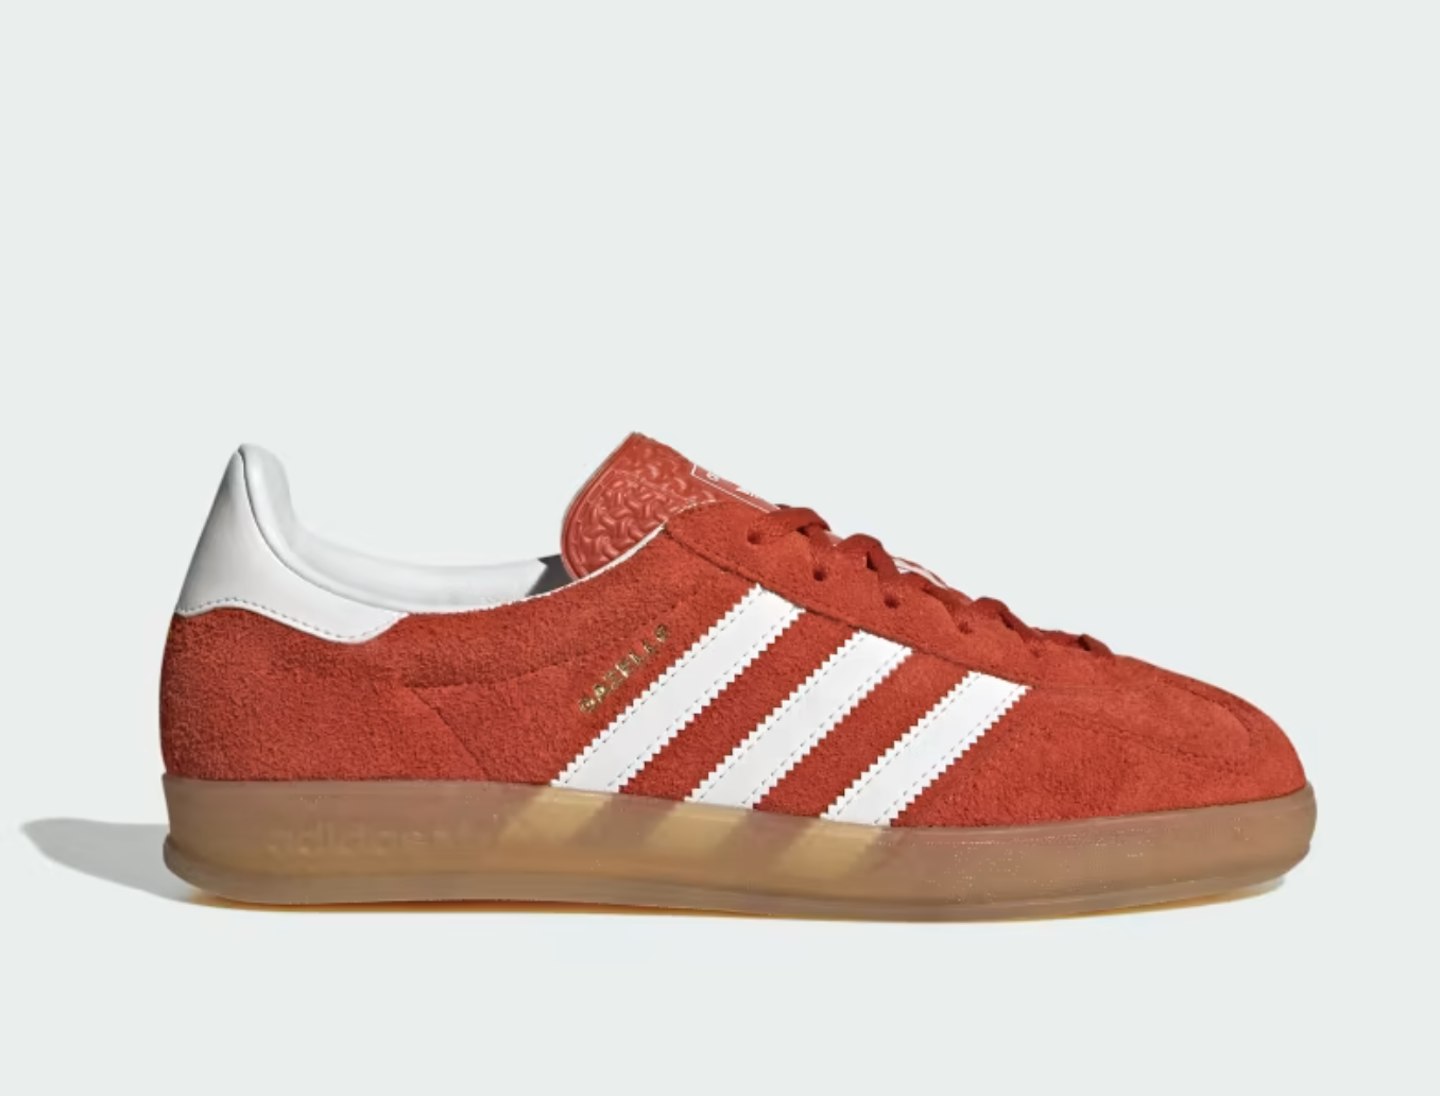 Adidas Gazelle Indoor Shoes in Red